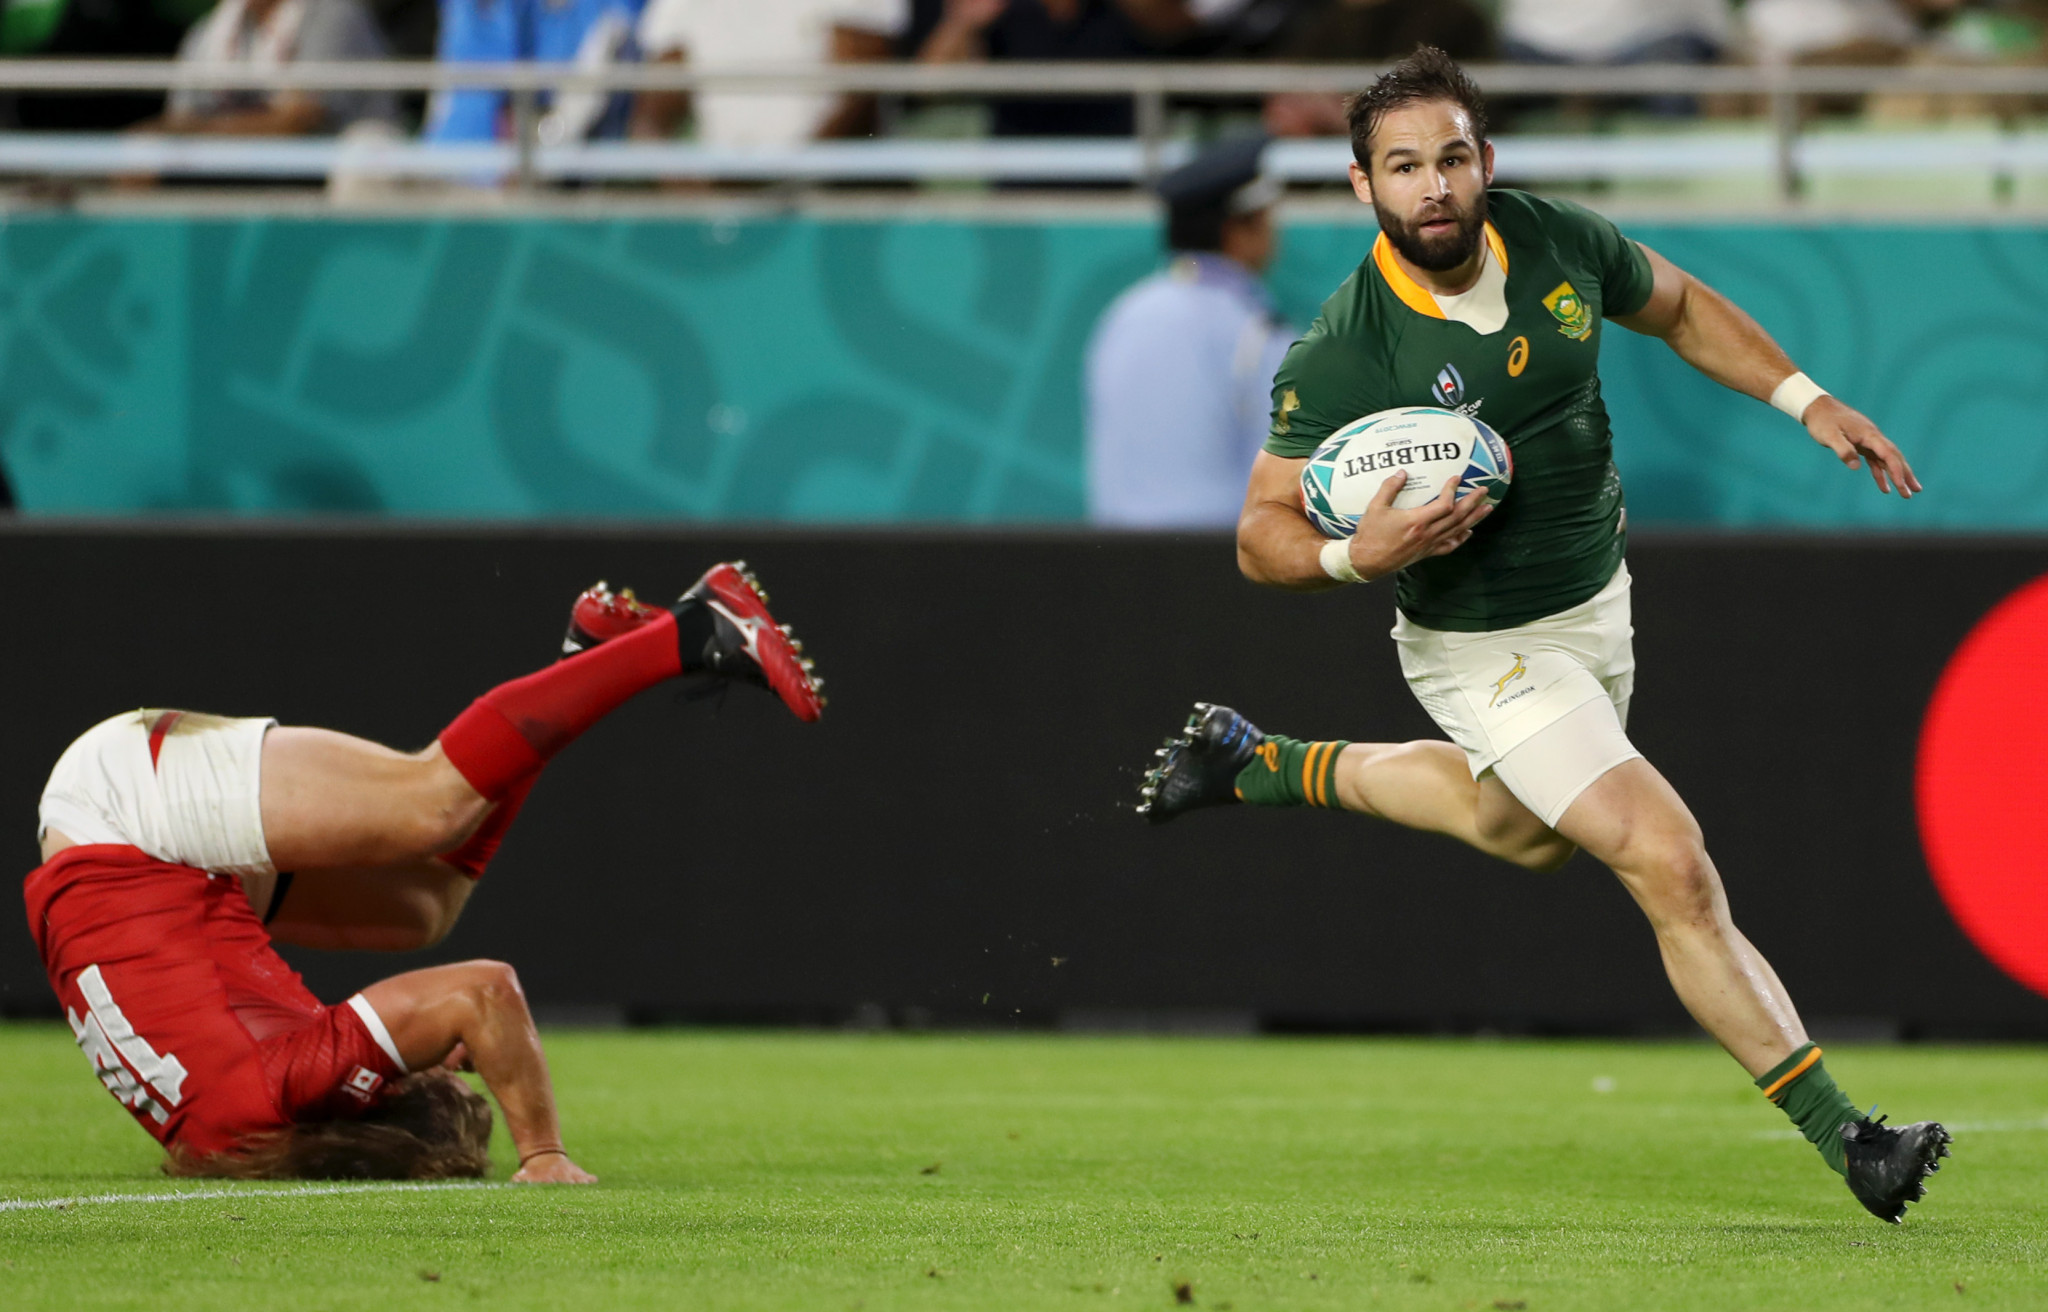 He's not even a starting halfback, but the brilliant Cobus Reinach still ran in a hat-trick of tries ©Getty Images